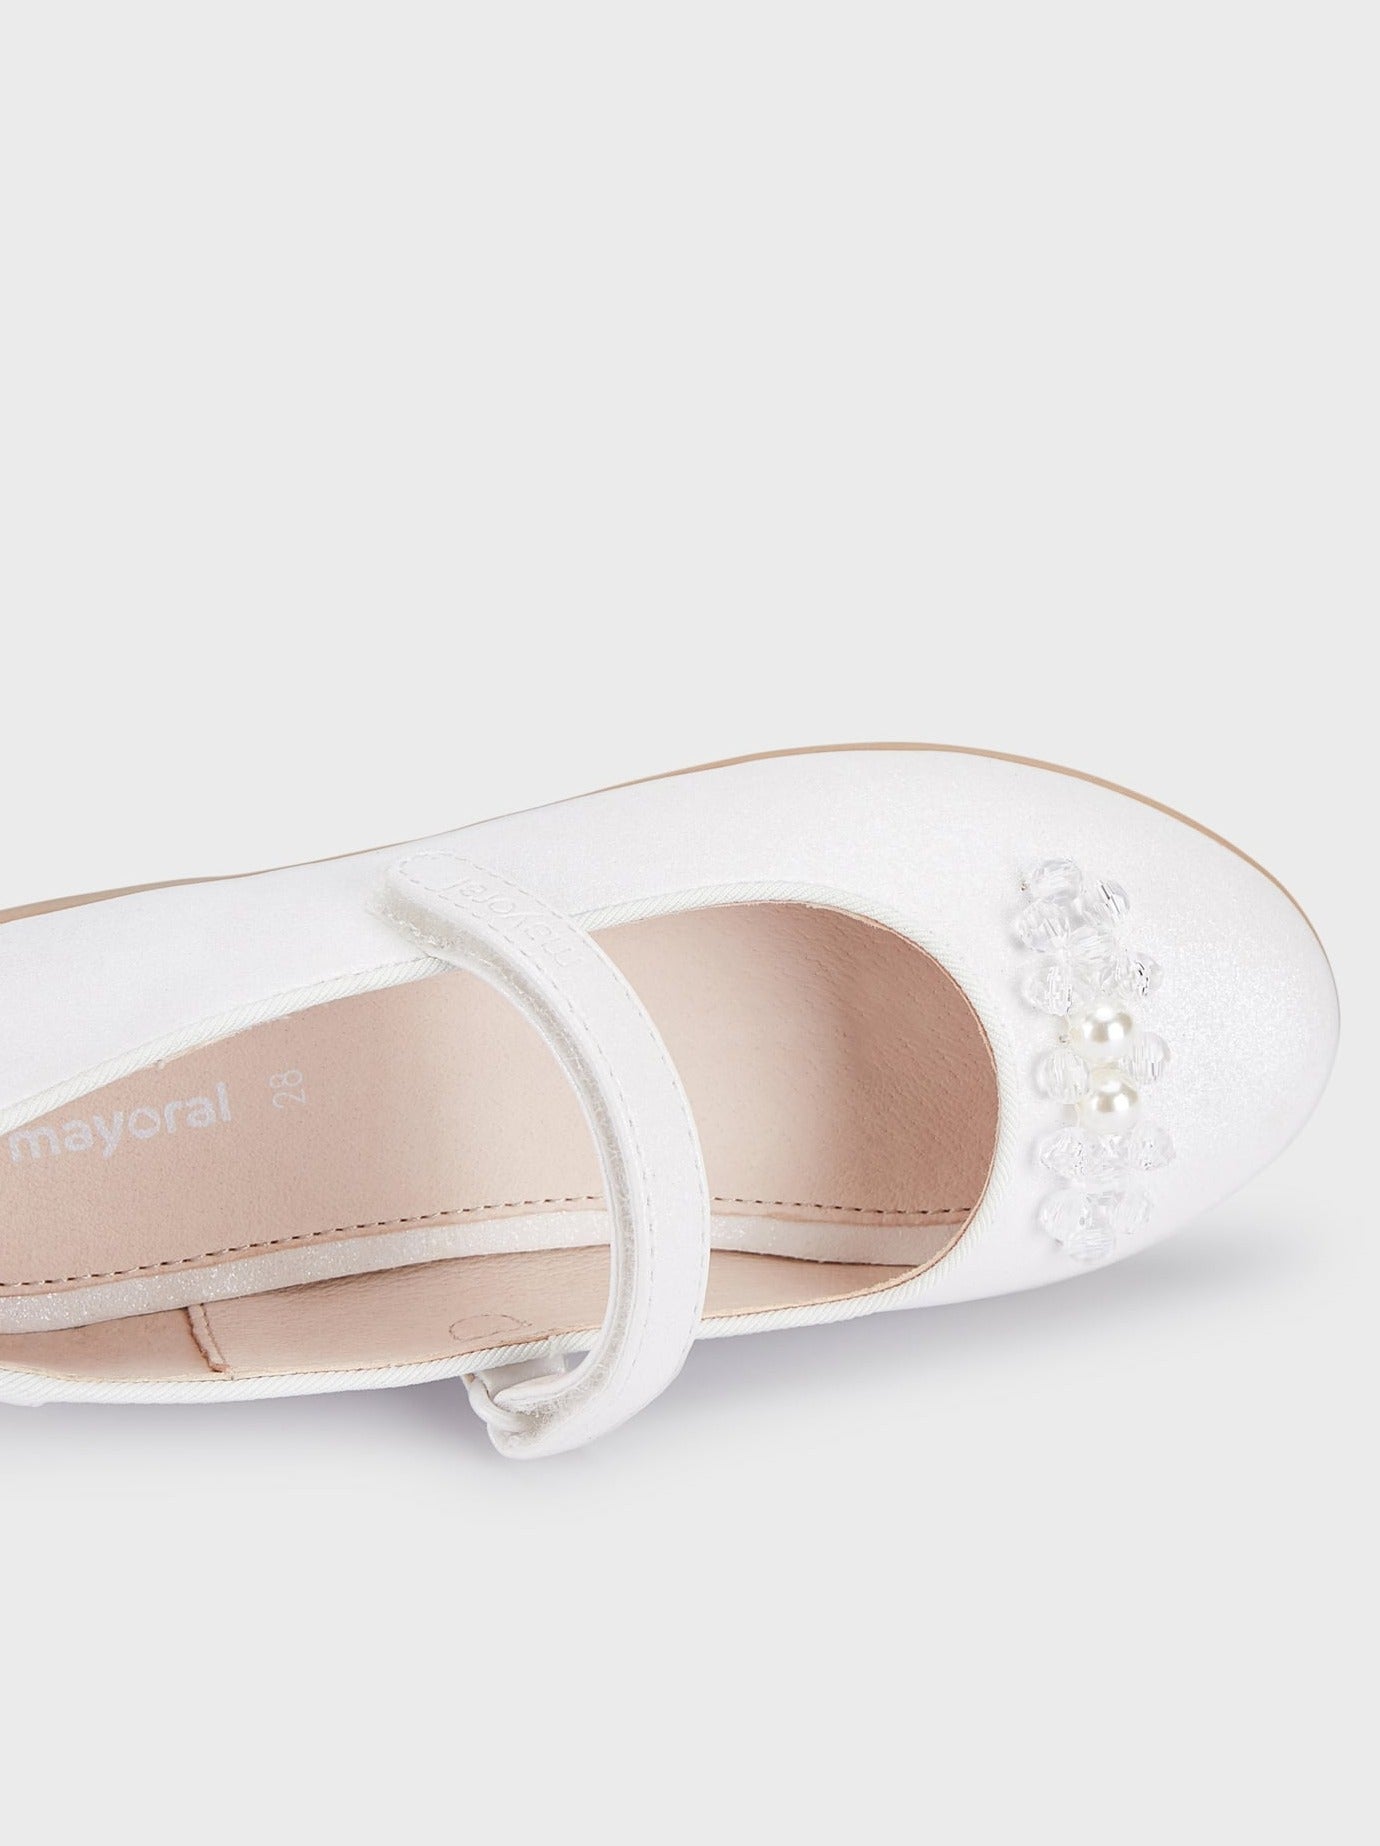 Mayoral Formal Ballet Flats w/Beads & Pearls _White 43437-087